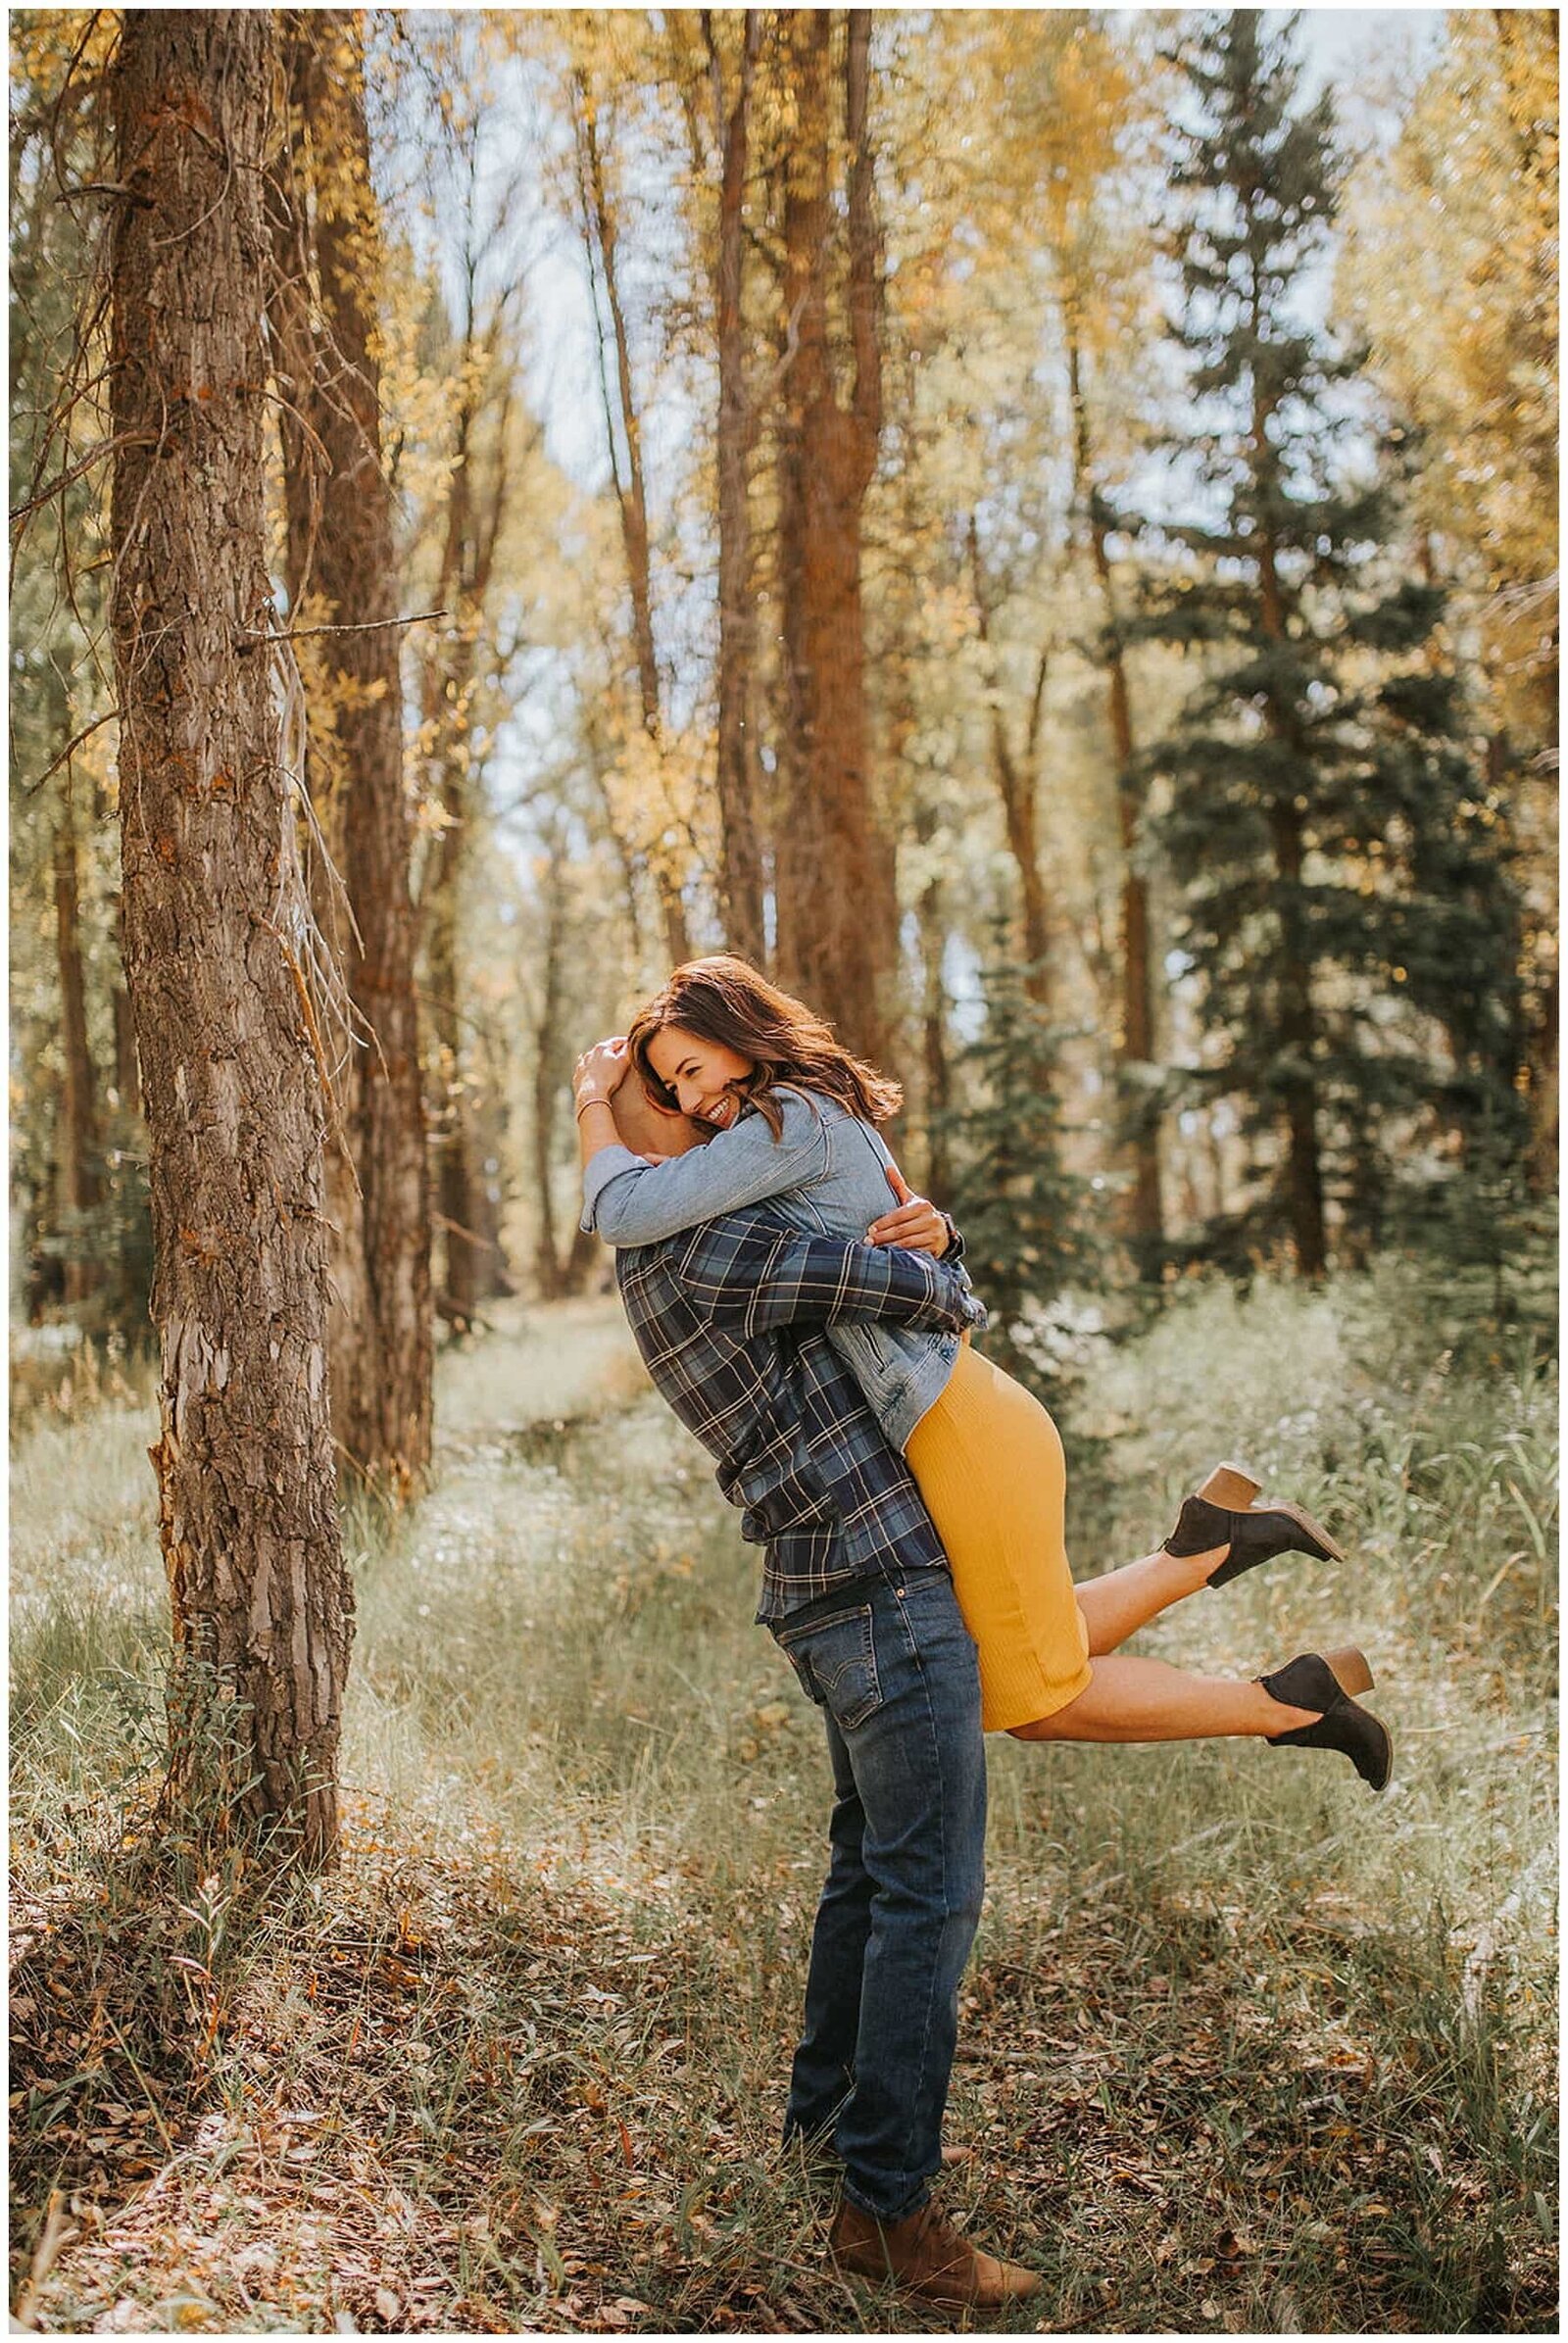 Lake Tahoe wedding photographer captures couple hugging in forest